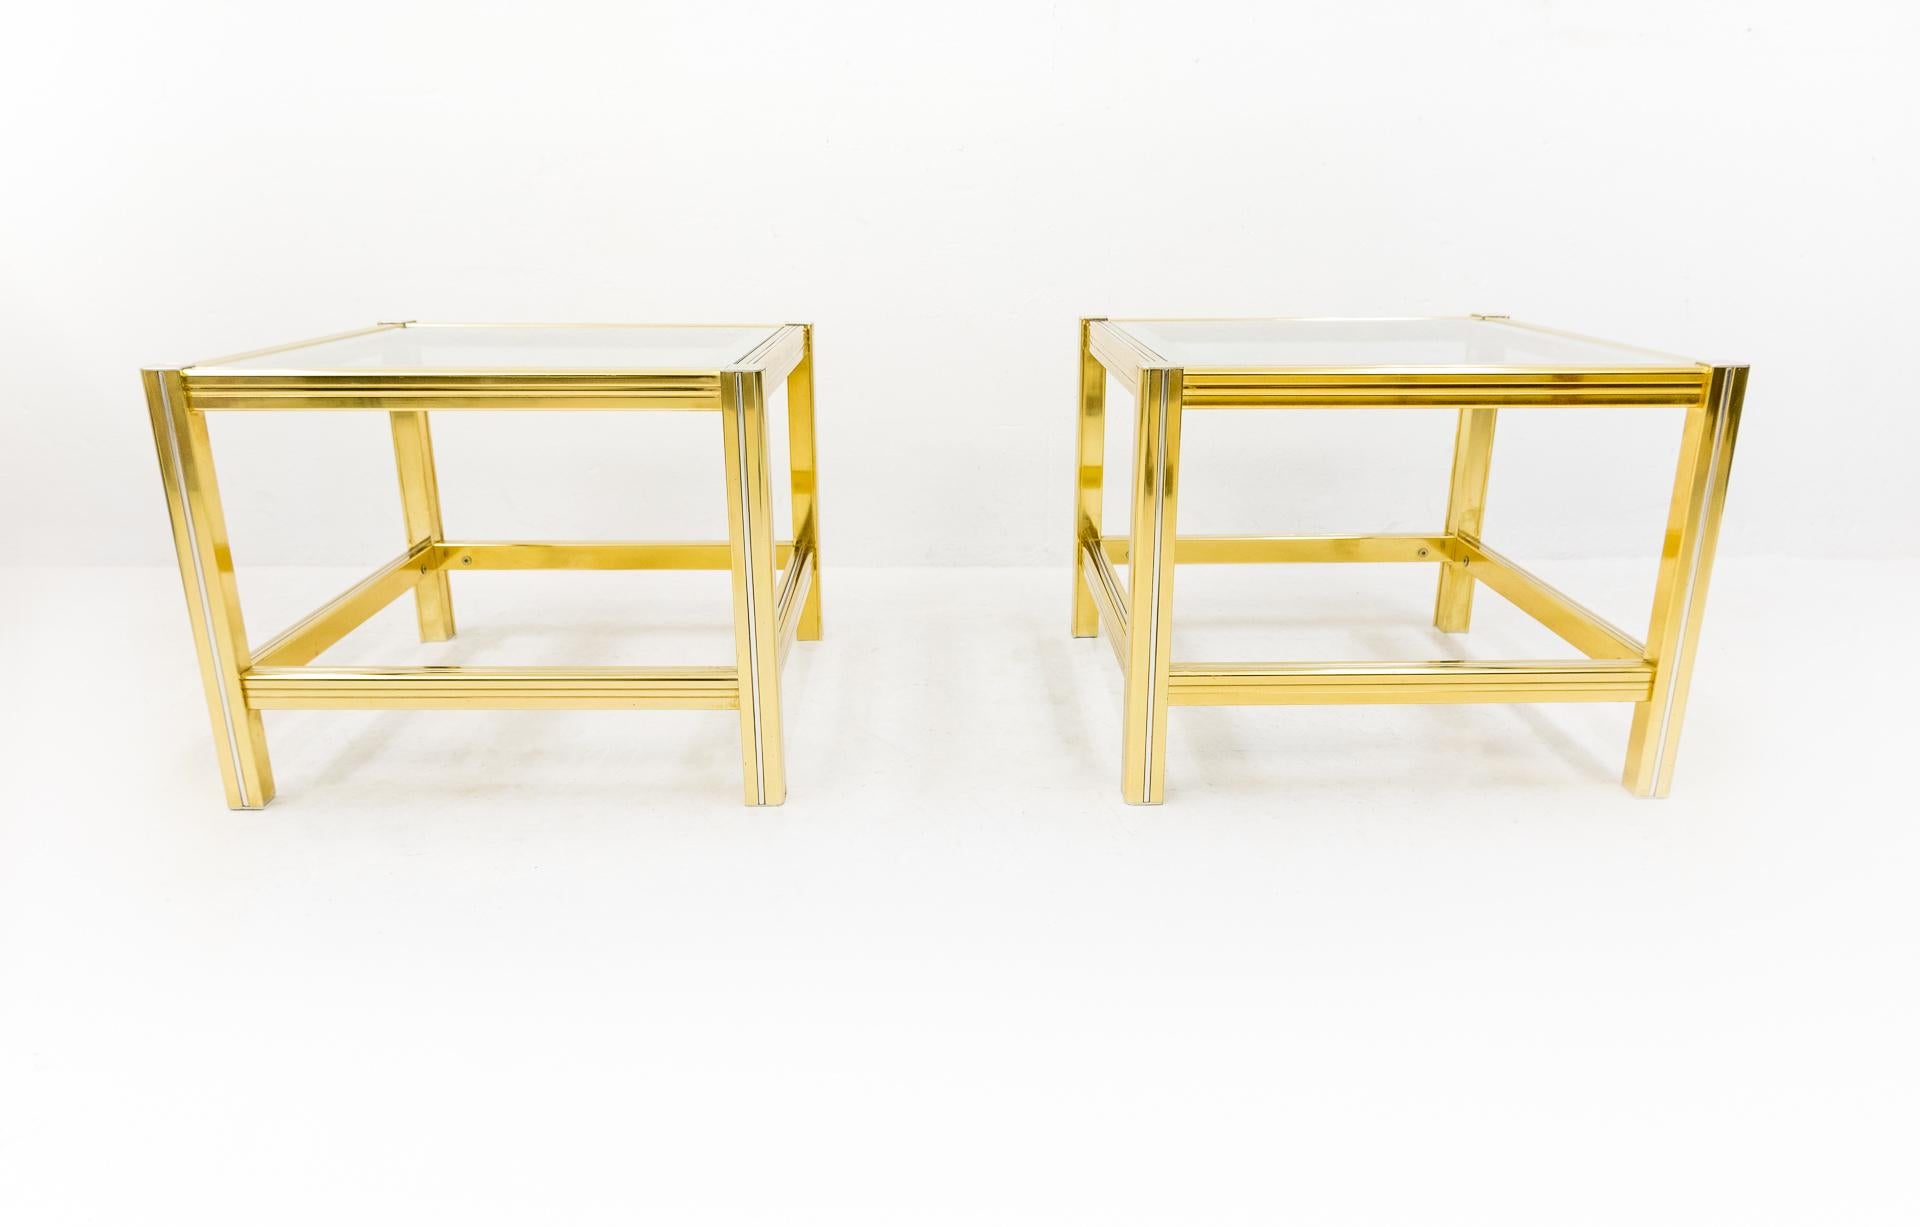 Two brass side tables. Comes with the original glass tops. Brass and chrome color.
Very nice side tables. Nightstand tables. Very good condition. Maison Jansen style.